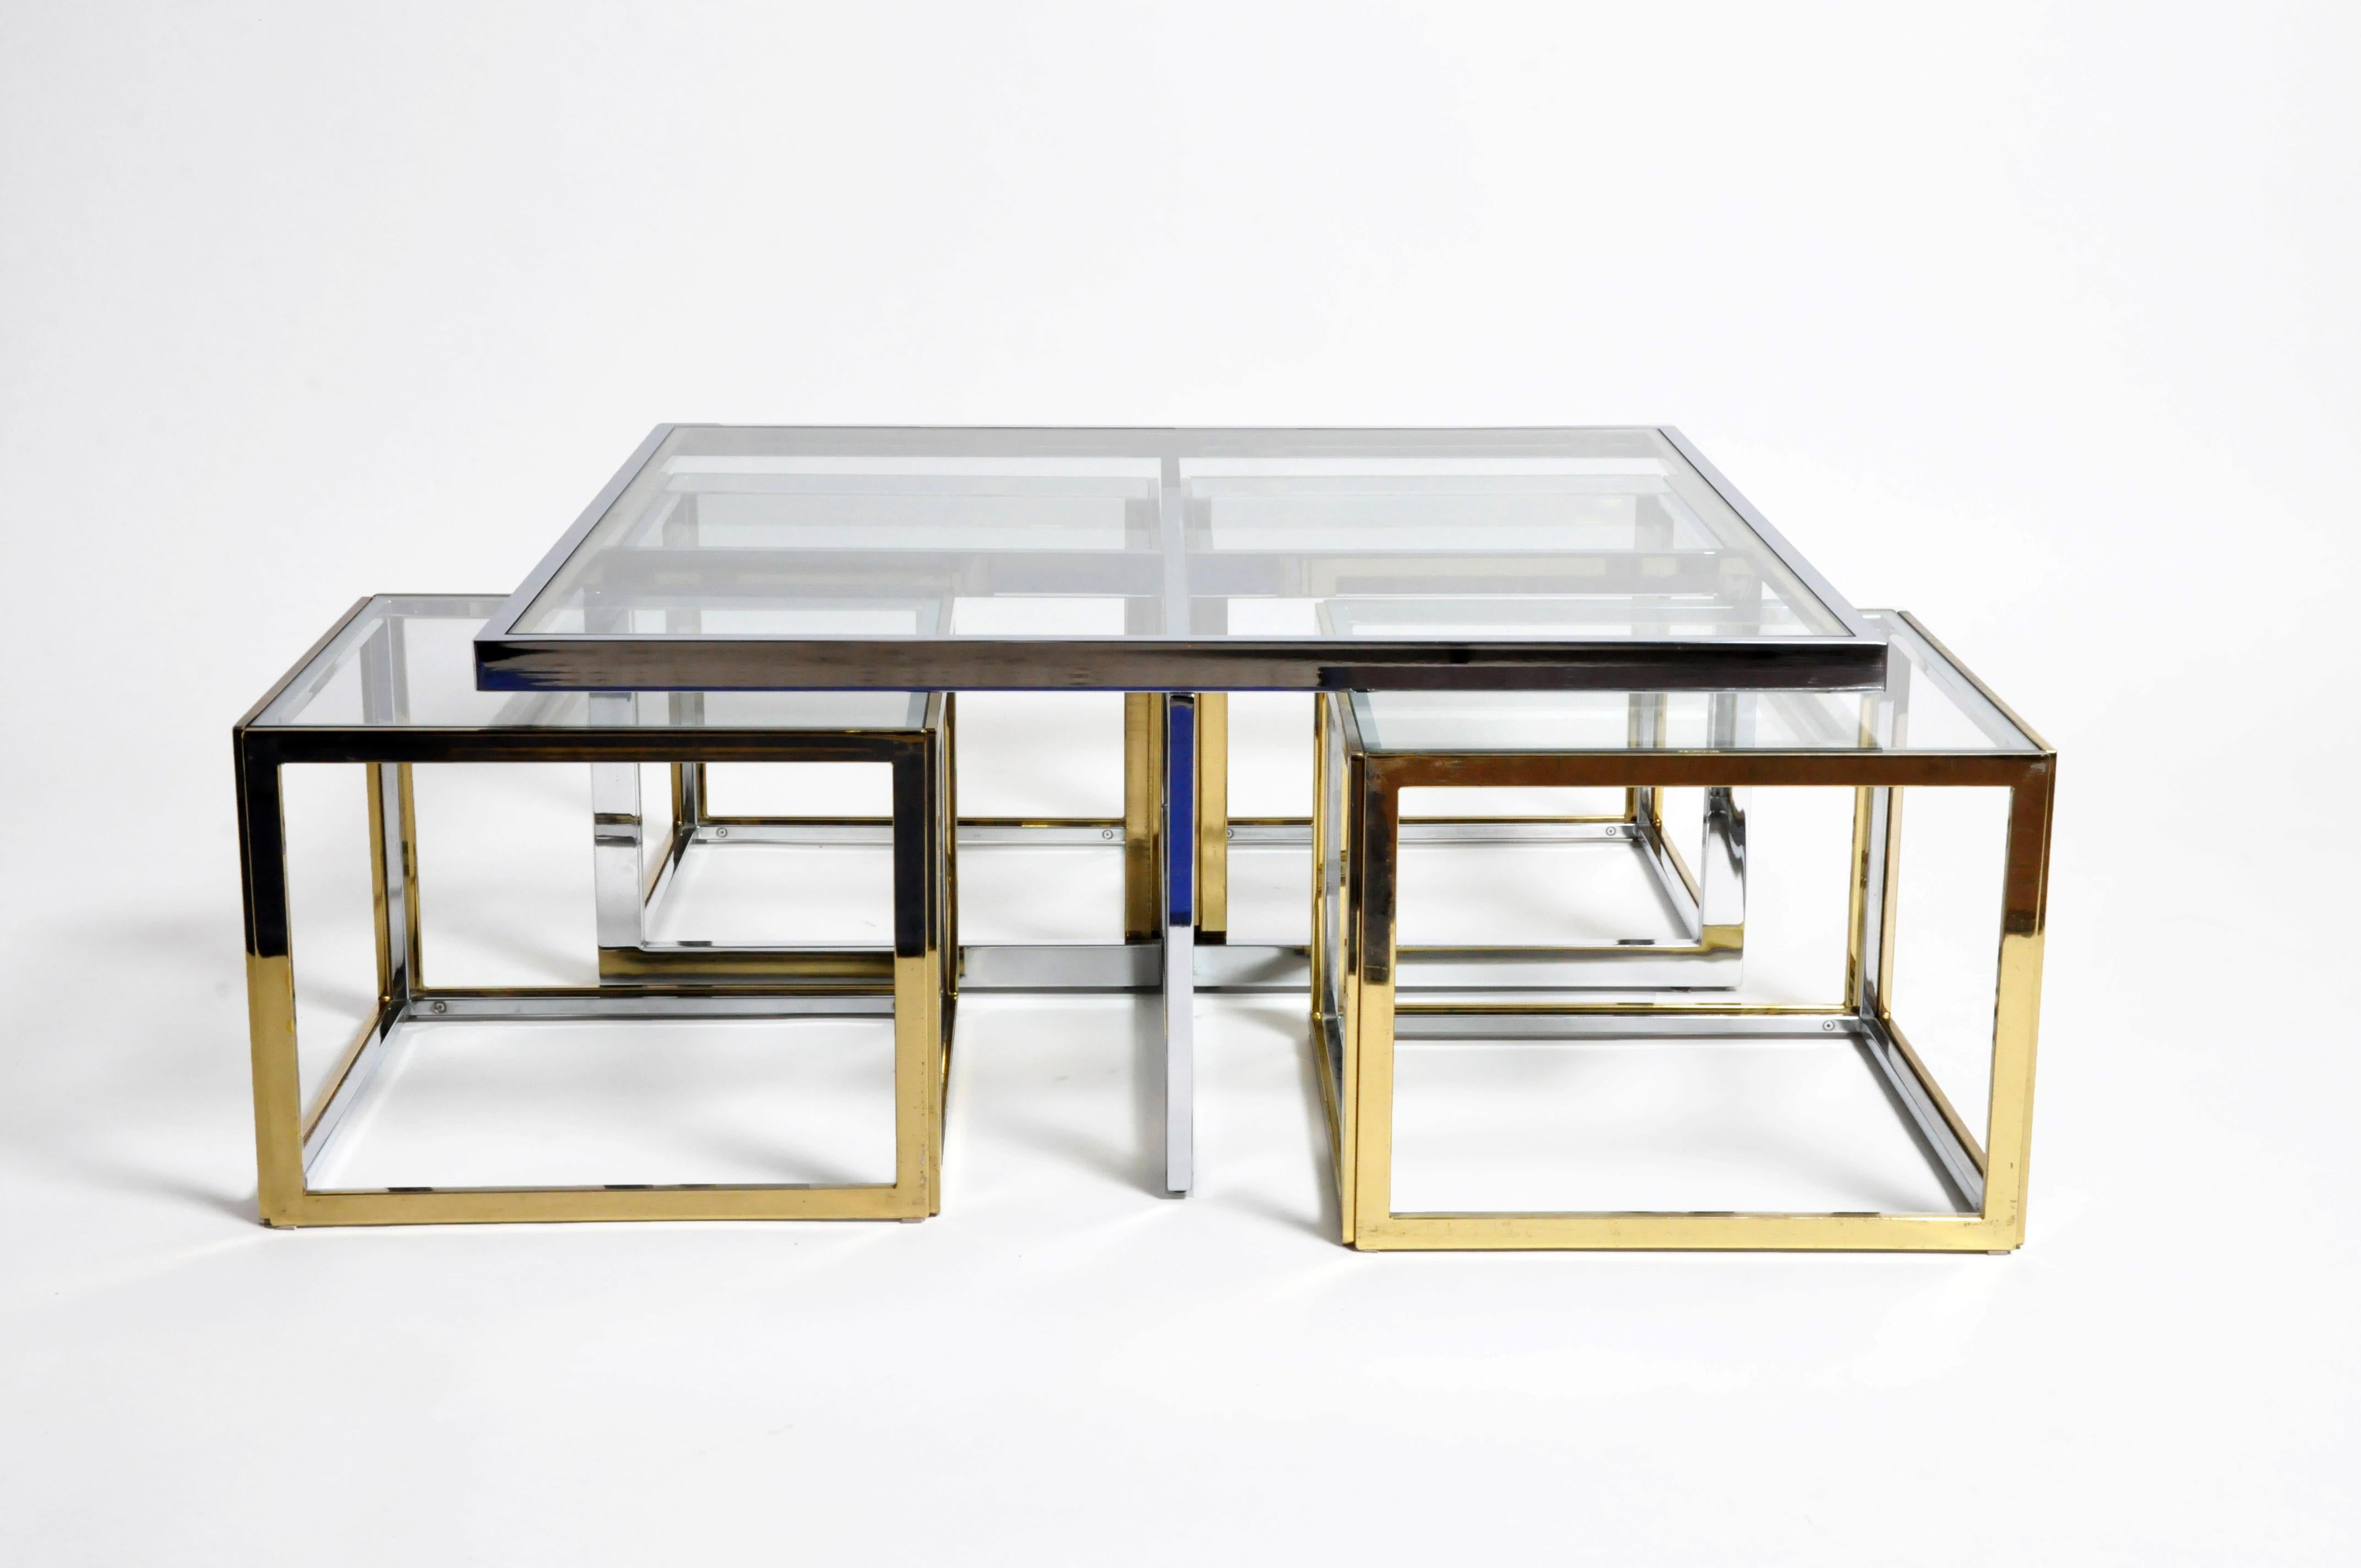 A rare Maison Jean Charles style low table made from chrome and glass coffee table ensemble in 5 parts. Manufactured and designed by Maison Jean Charles, France around 1970. Low Chrome table with 4 nesting cubes in brass and glass. Light scratches